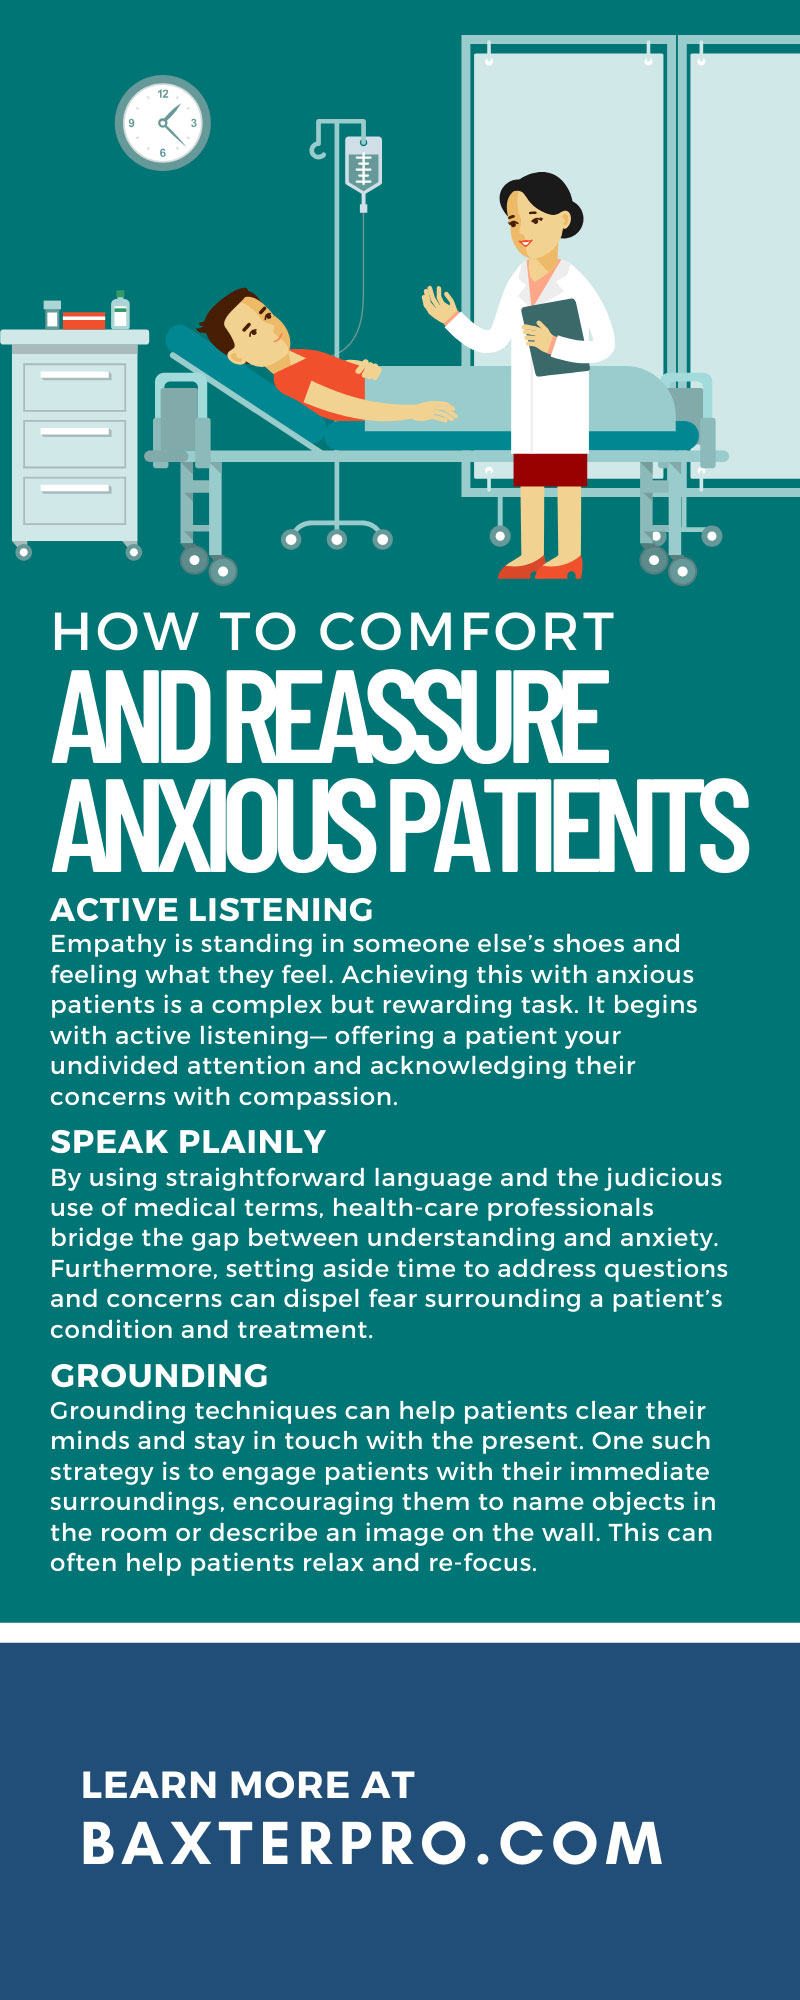 How To Comfort and Reassure Anxious Patients